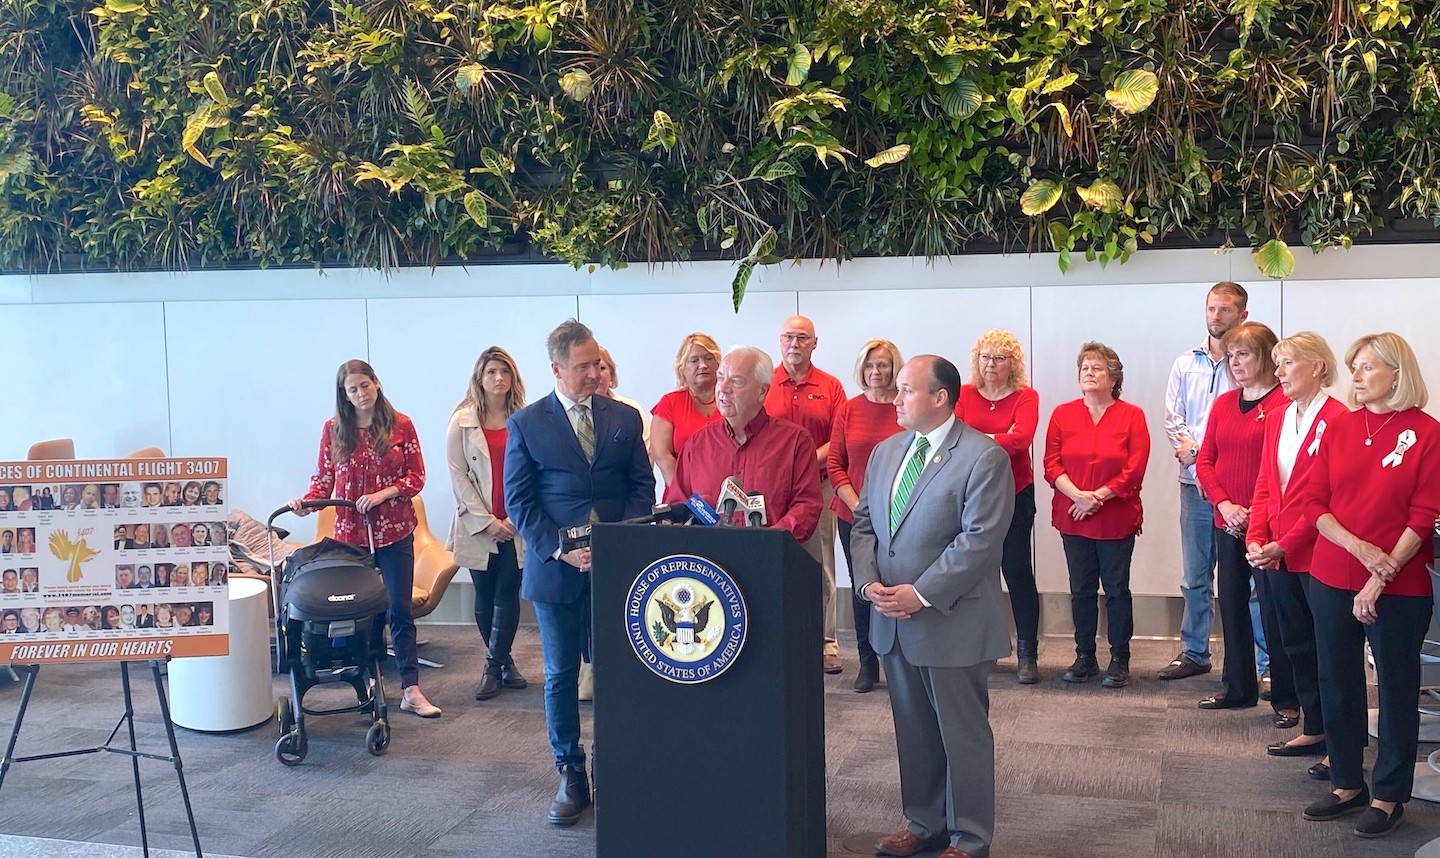 Congressman Brian Higgins is shown with John Kausner, Congressman Nick Langworthy and families of Flight 3407. (Submitted photo)